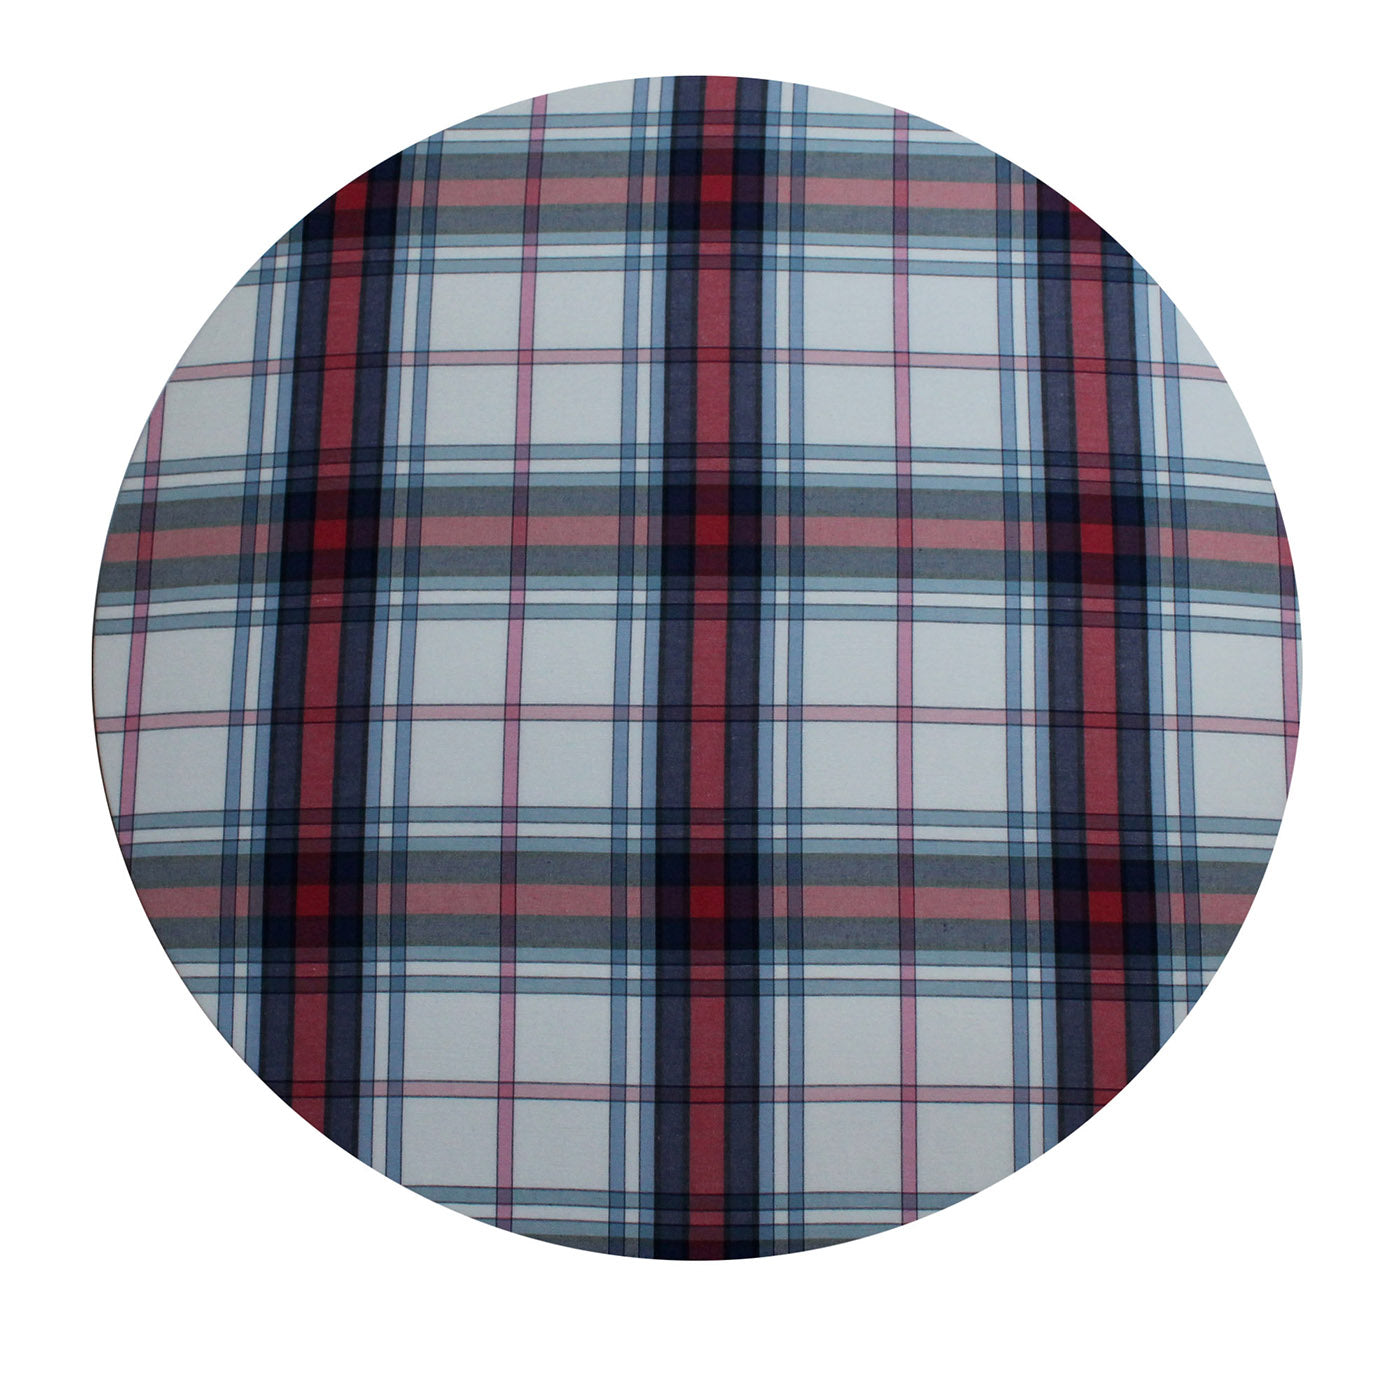 Cuffiette Check Round Blue & Red Placemat  - Main view